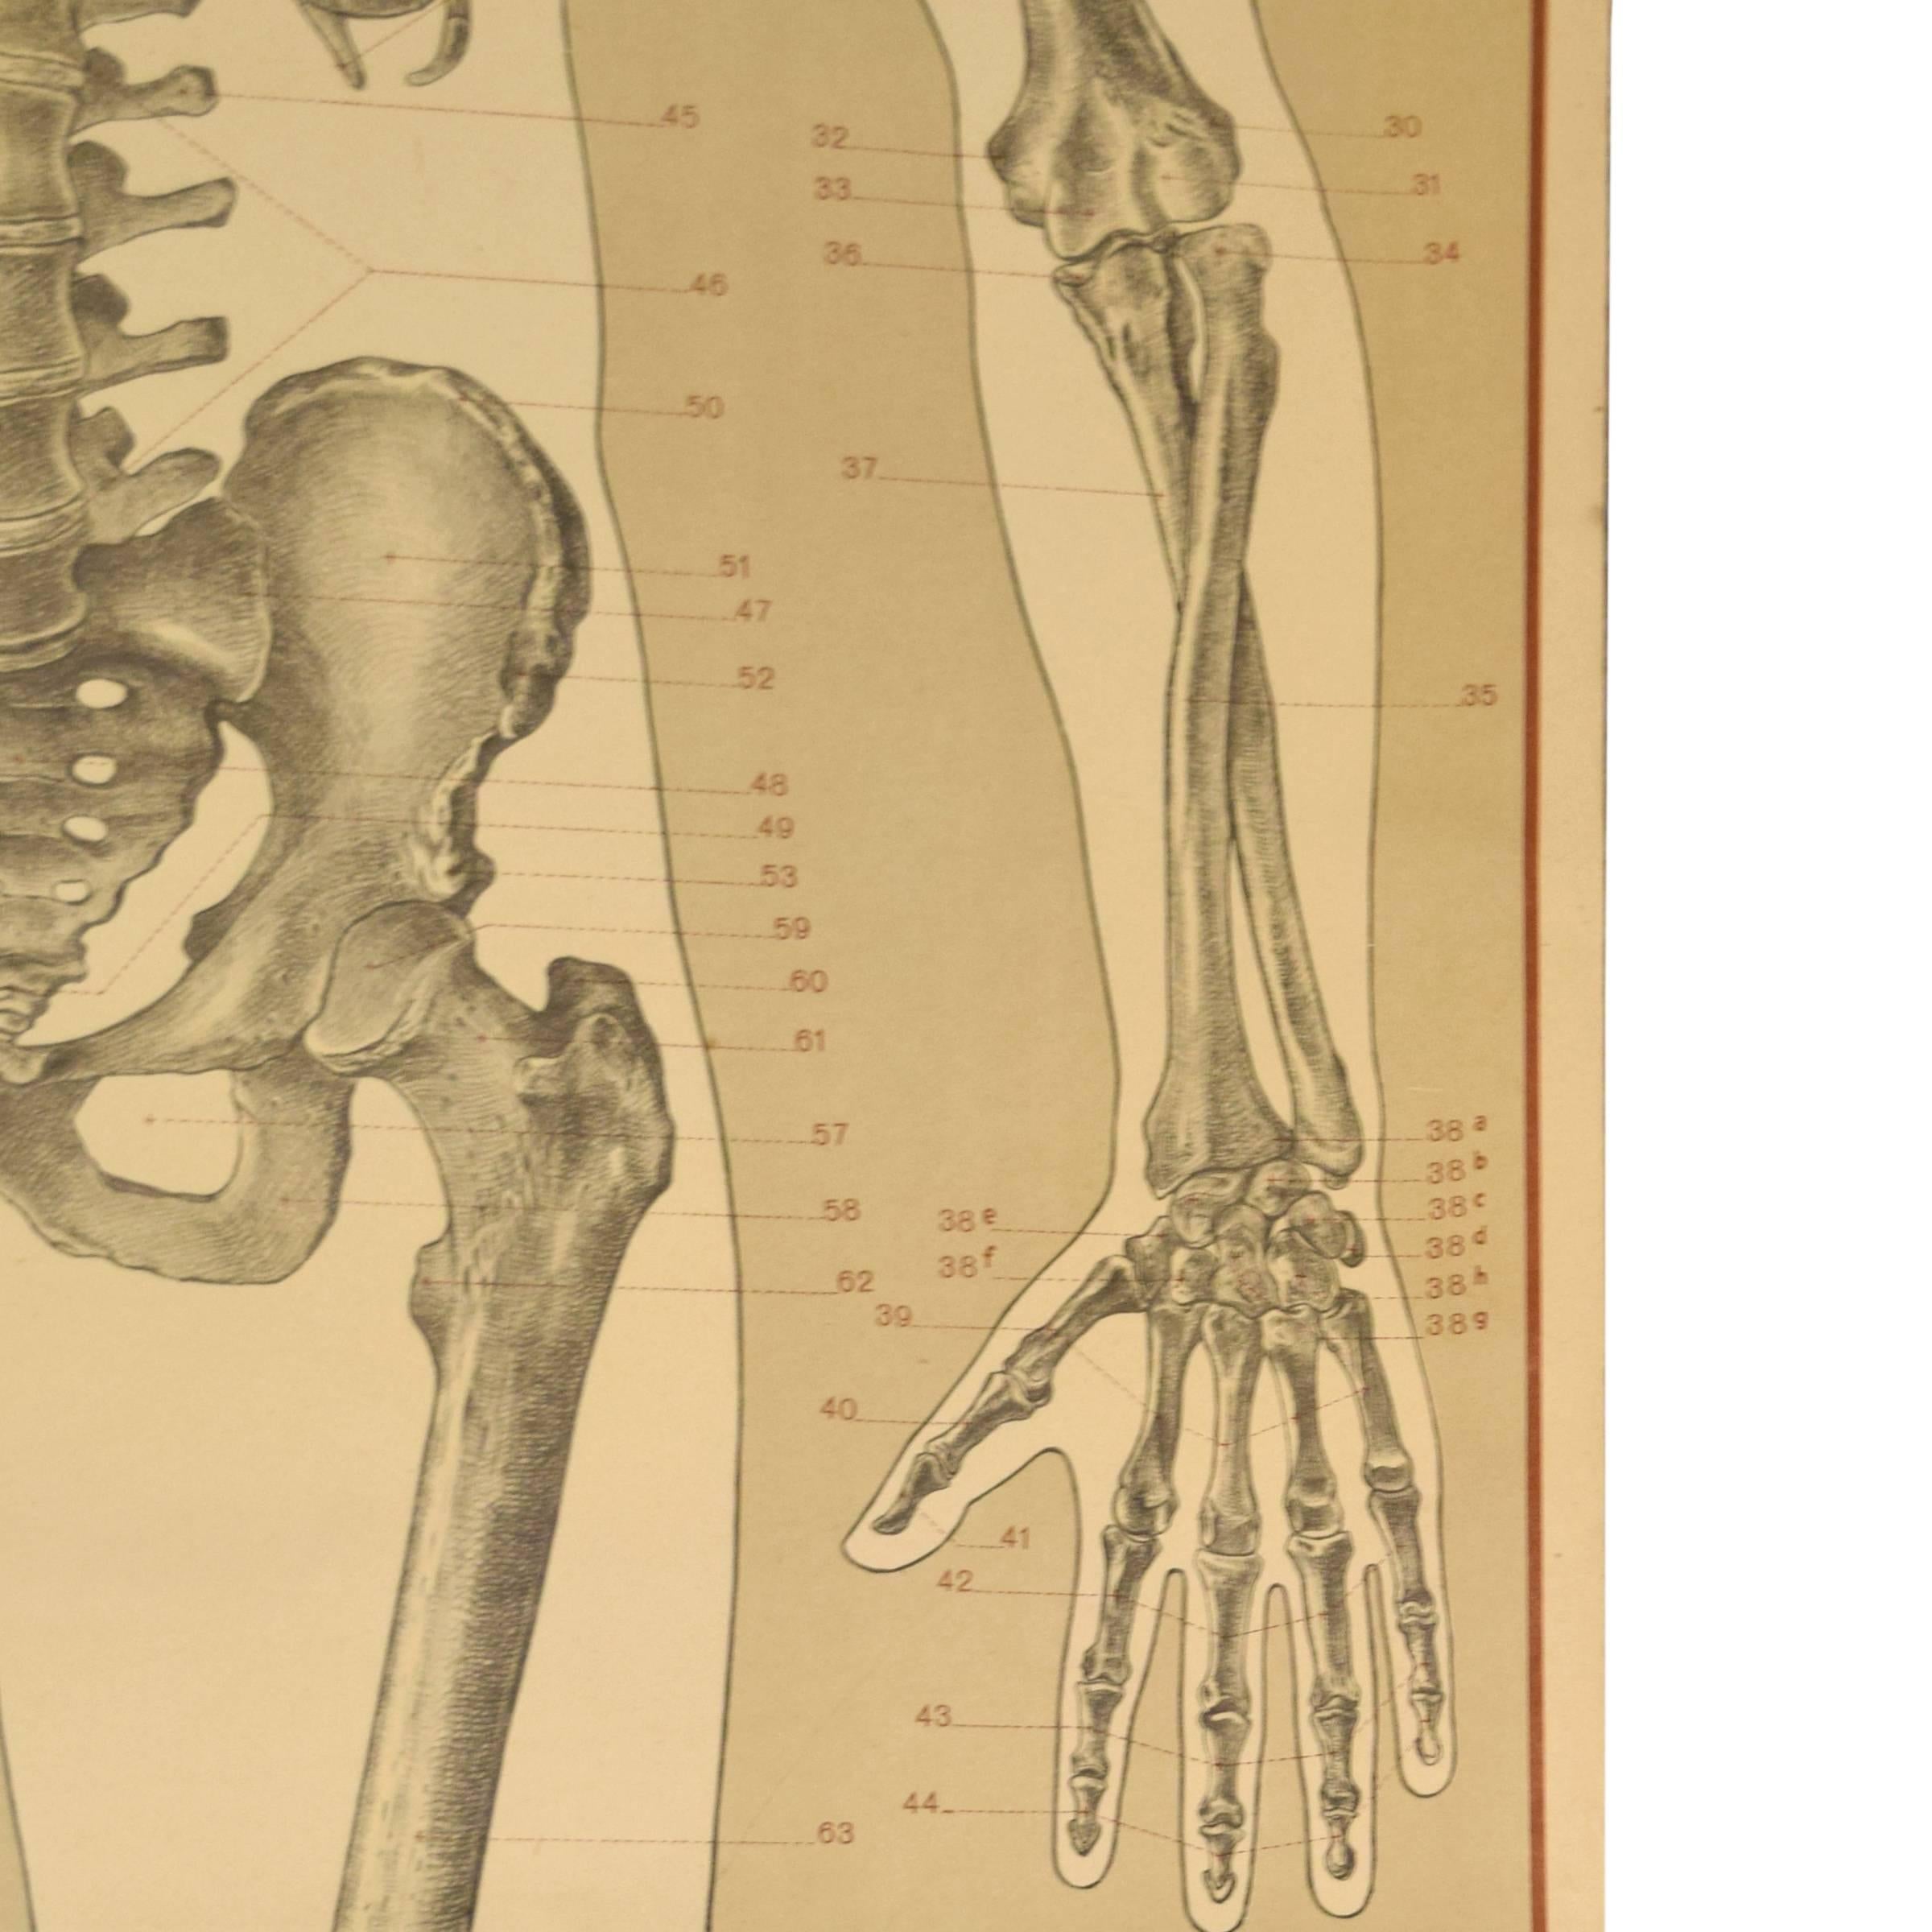 An anatomical skeleton poster of a human skeleton from the Deutsche Hygiene Museum printed by Landesdruckerei Sachsen of Dresden, Germany, circa 1910.

